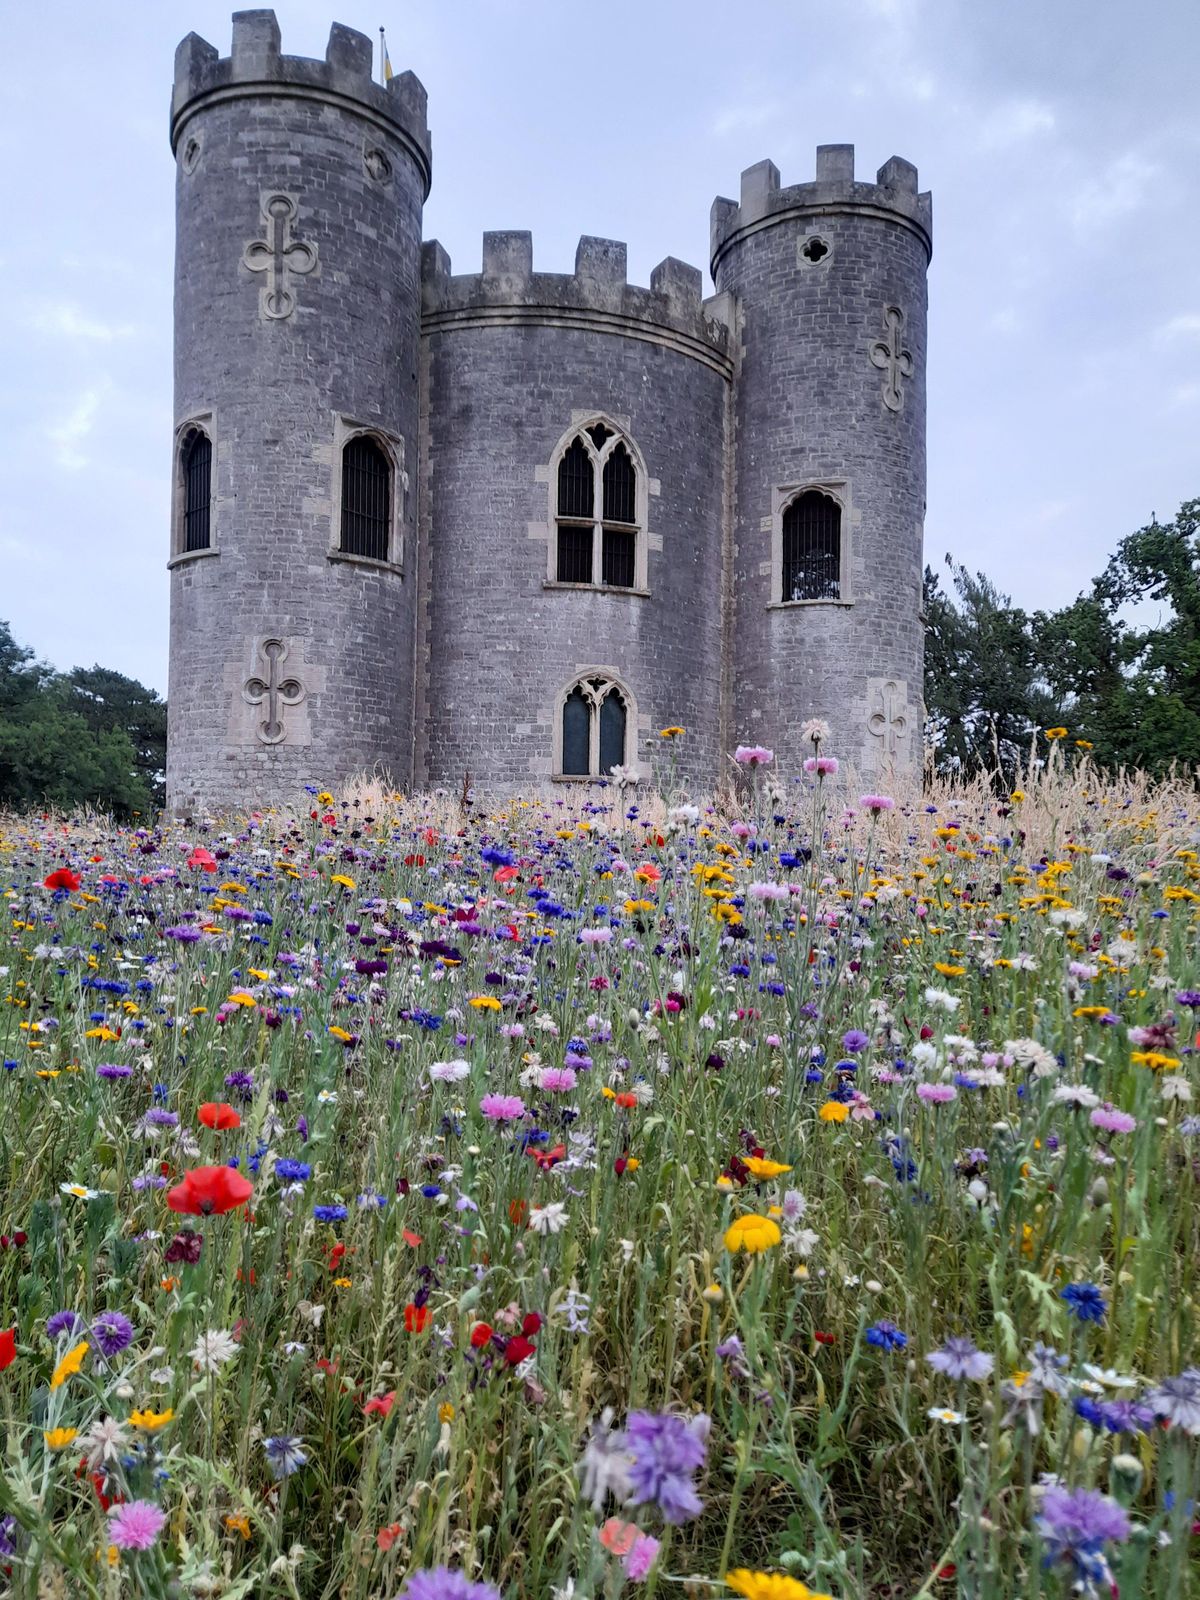 Summer Plant, tree and wildlife identification walk at Blaise Castle